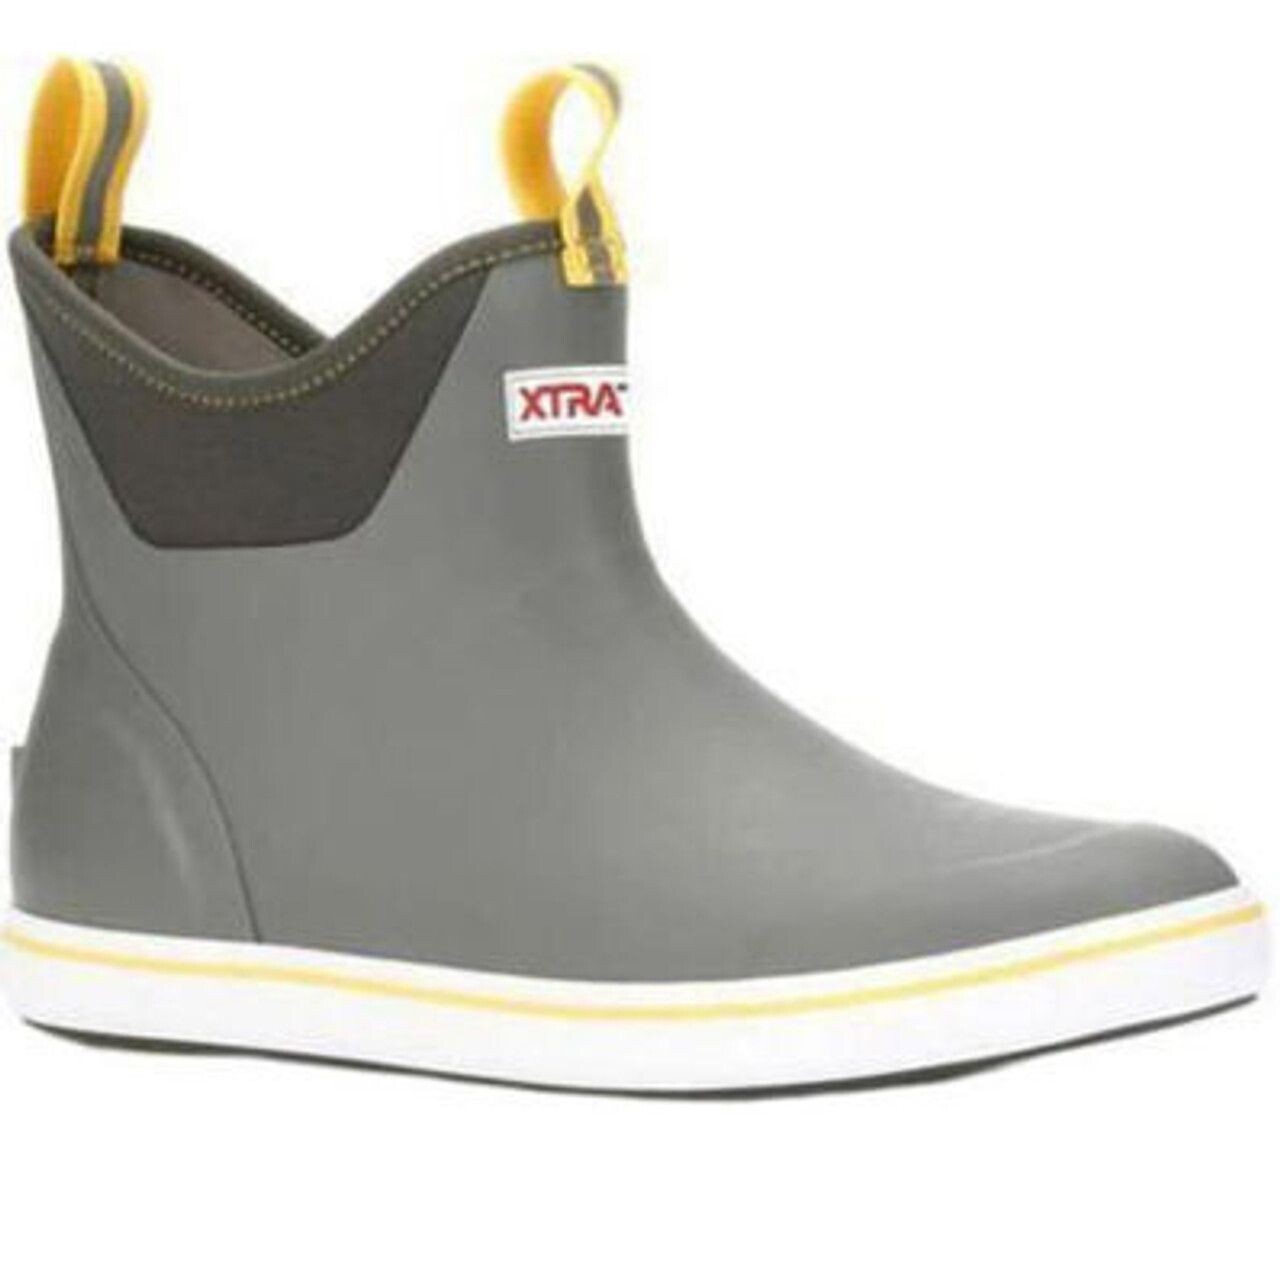 Men's 6" Ankle Deck Boot by XTRATUF